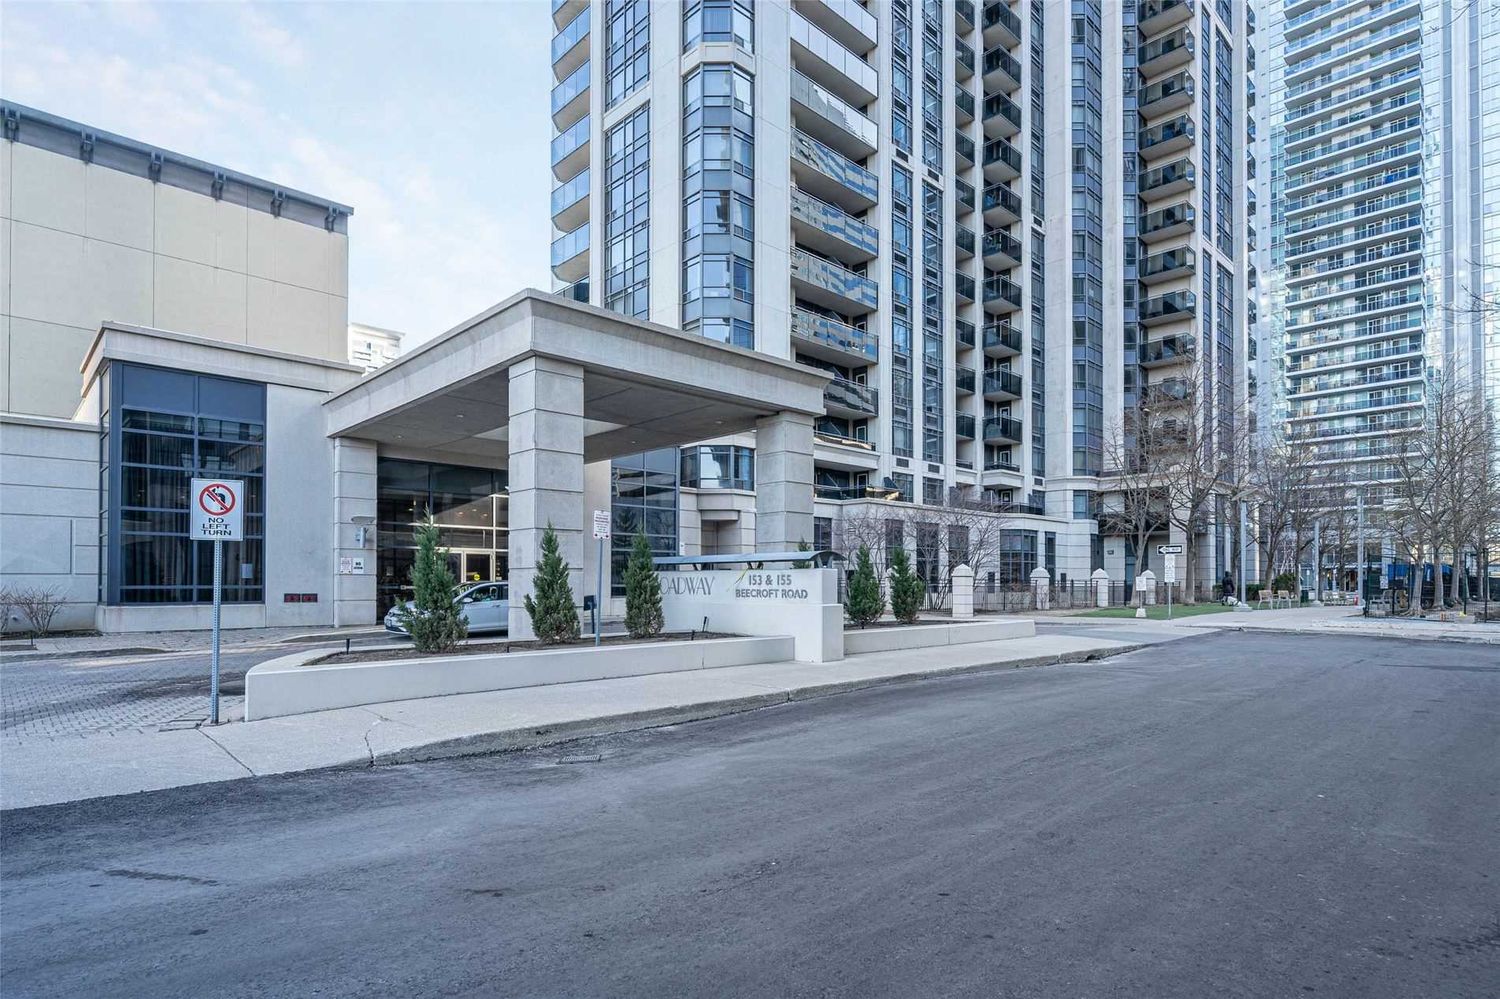 155 Beecroft Road. Broadway II Residences is located in  North York, Toronto - image #2 of 2